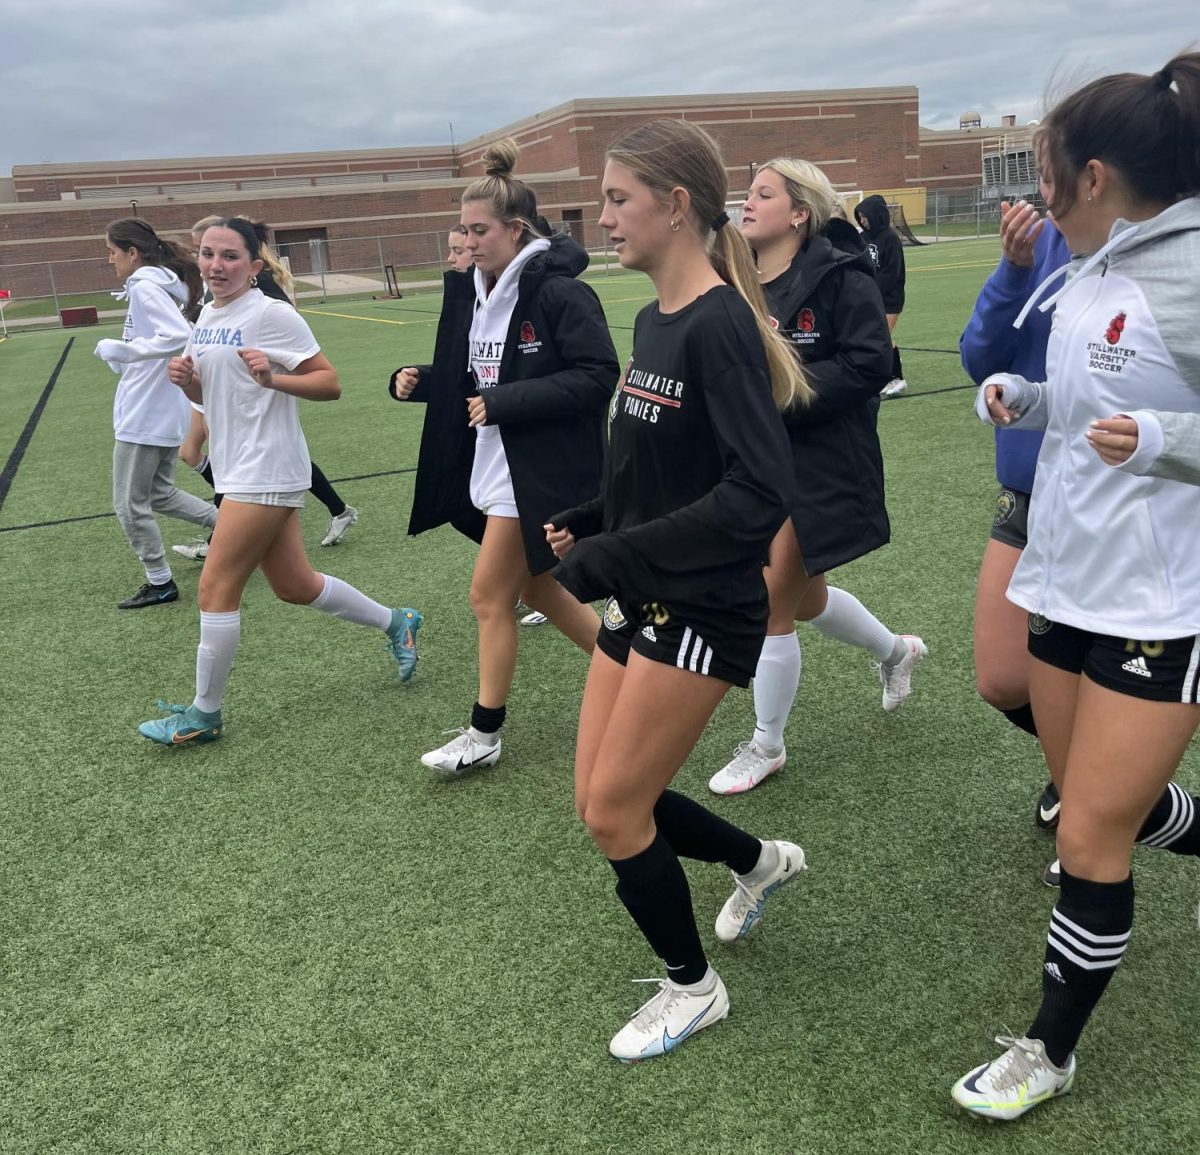 The girls soccer team warms up before their practice. Coaches Mike Huber and Dusty Dennis rebuilding the varsity girls soccer team after graduating 11 seniors in the class of 2022.